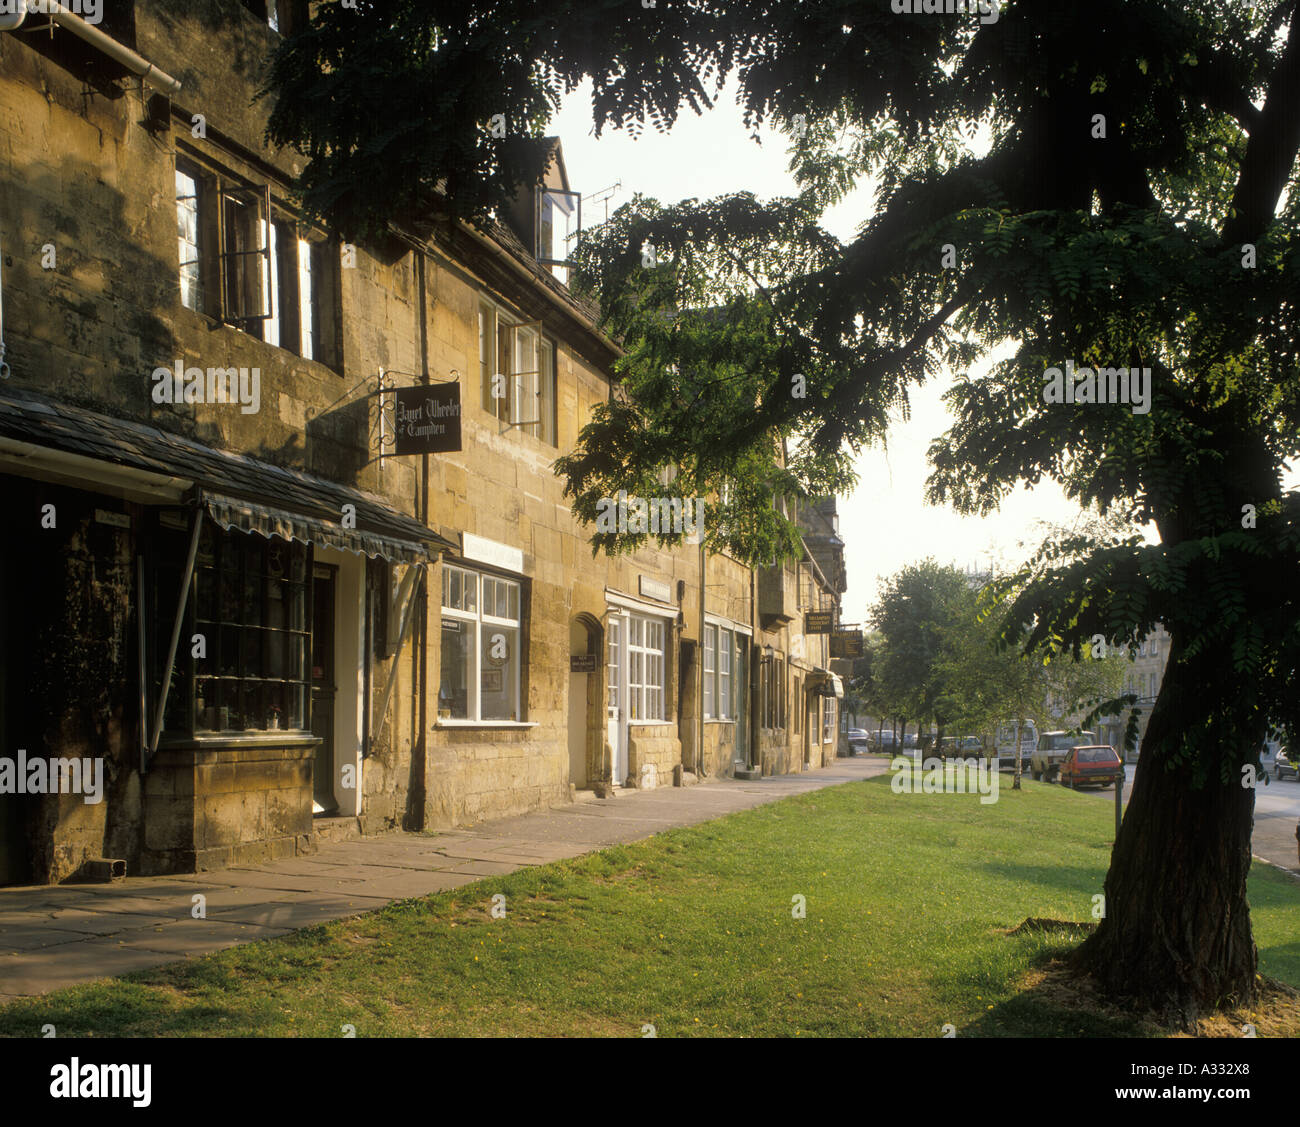 The High Street of the ancient Cotswold town of Chipping Campden, Gloucestershire Stock Photo